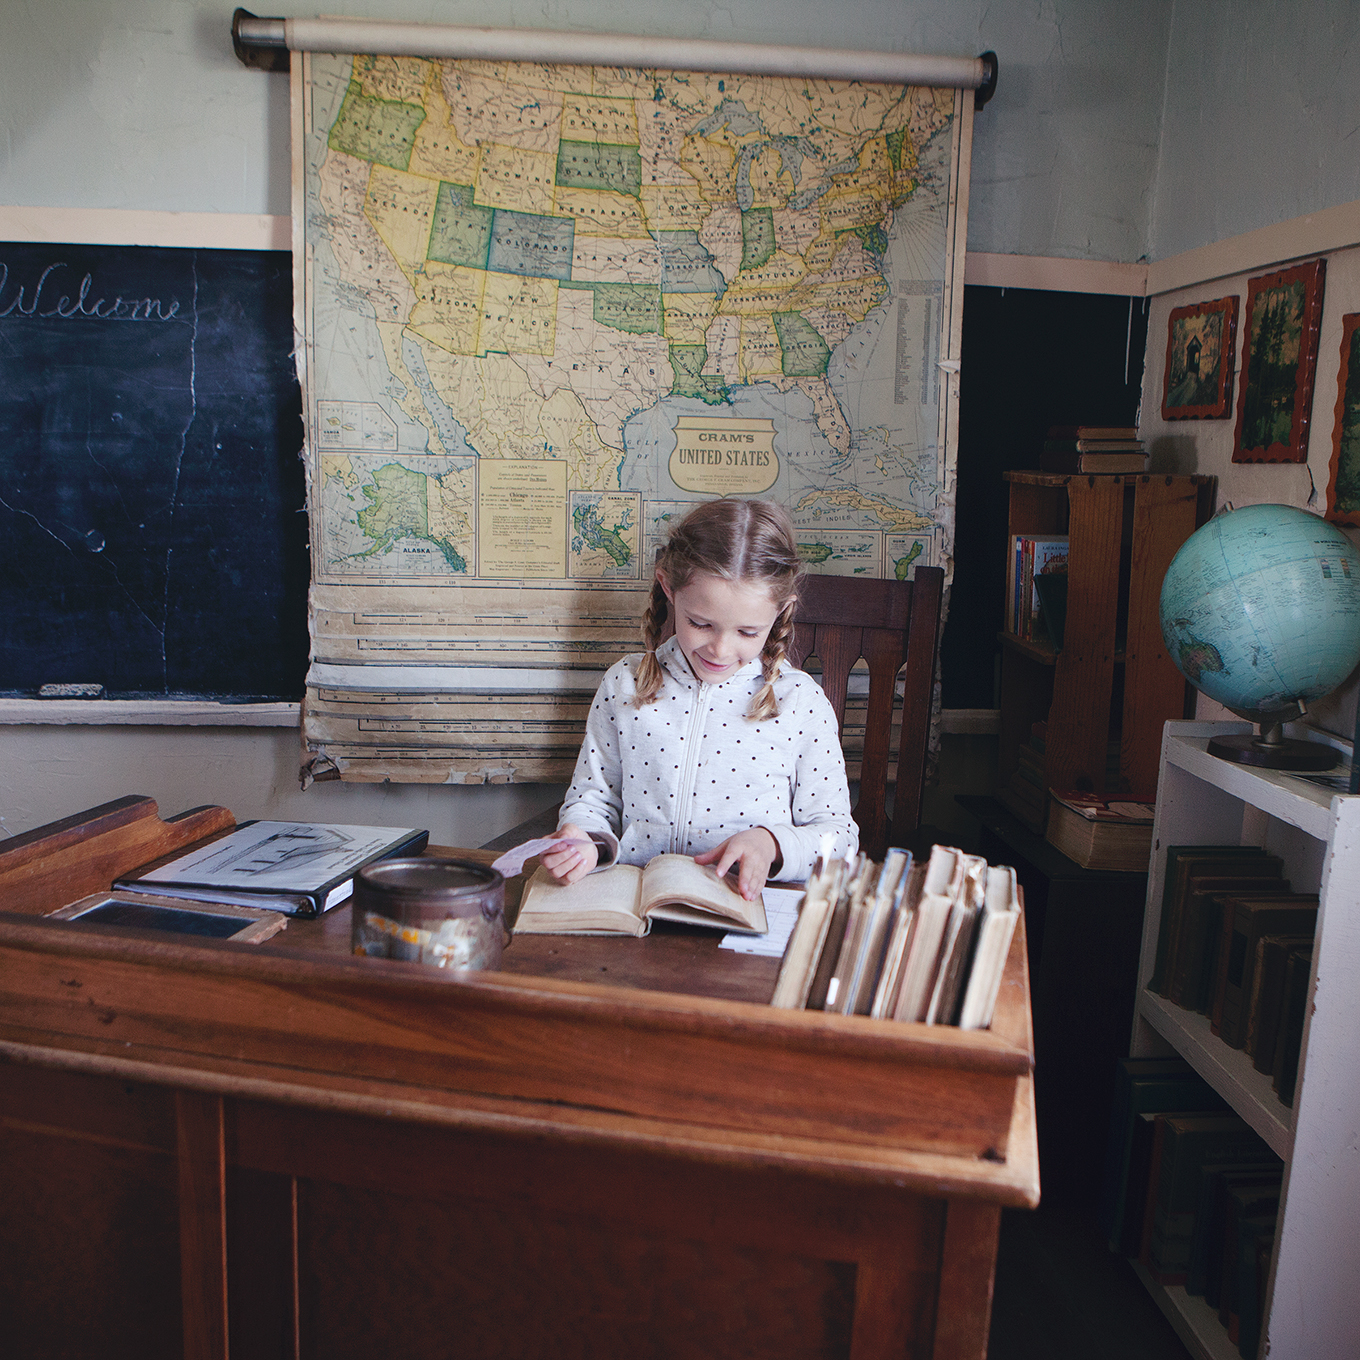 Looking for a truly memorable family experience? Step back in time at the Ingalls Homestead near De Smet, South Dakota! Watch history come to life while exploring the beautiful prairie homestead and learn about the rich pioneer history of the Ingalls family along the way.